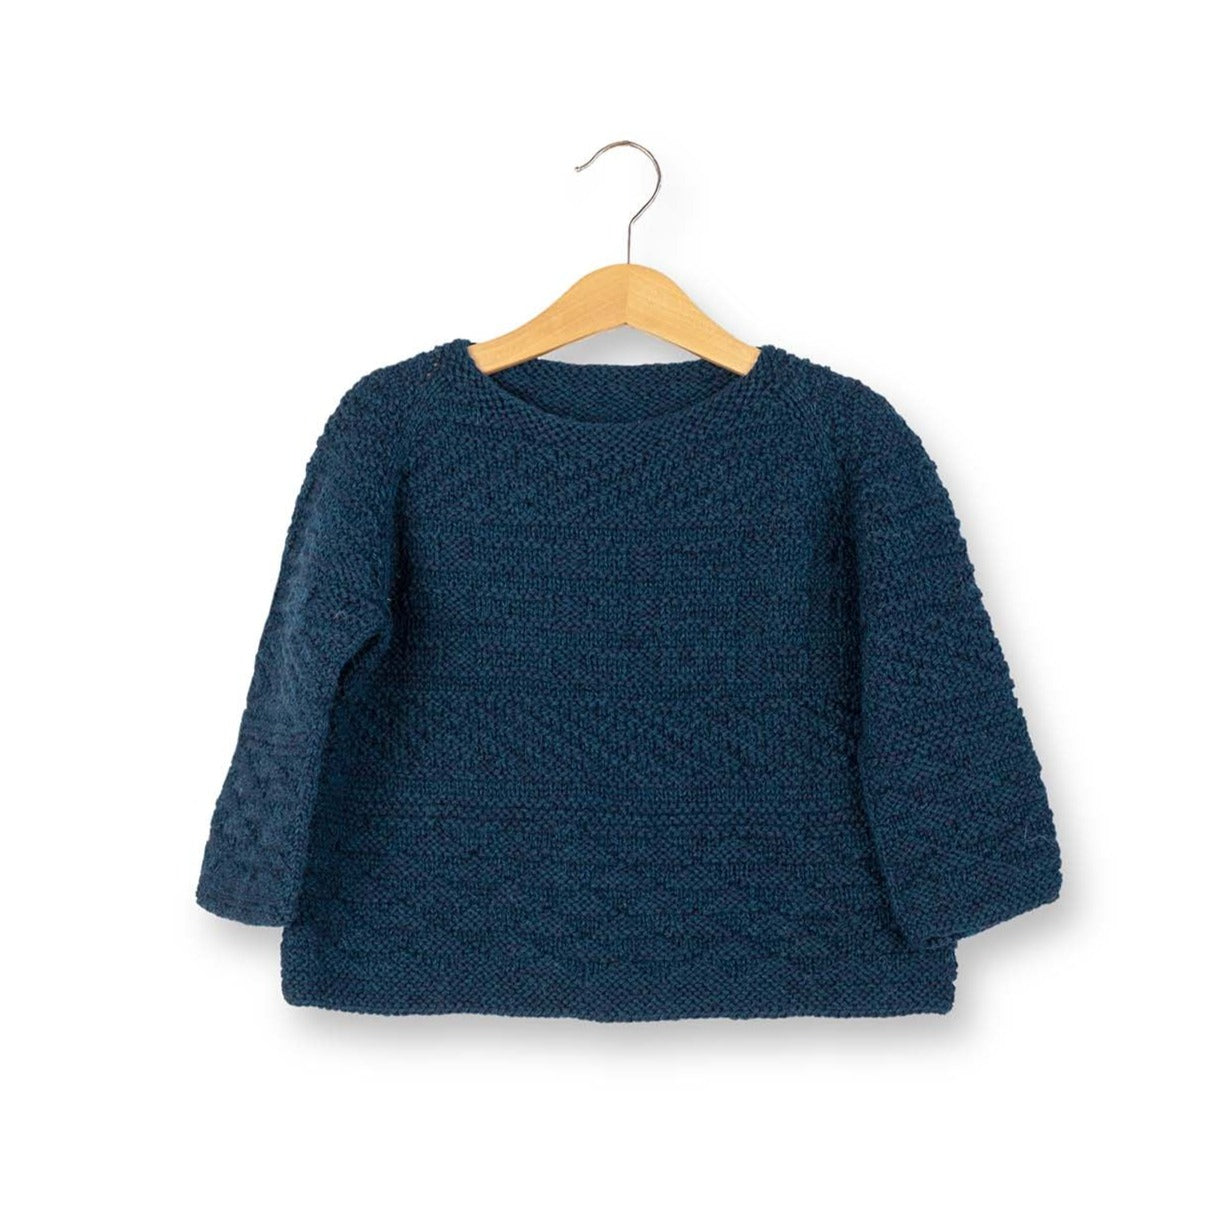 Ancher's Kids Sweater Pattern Isager